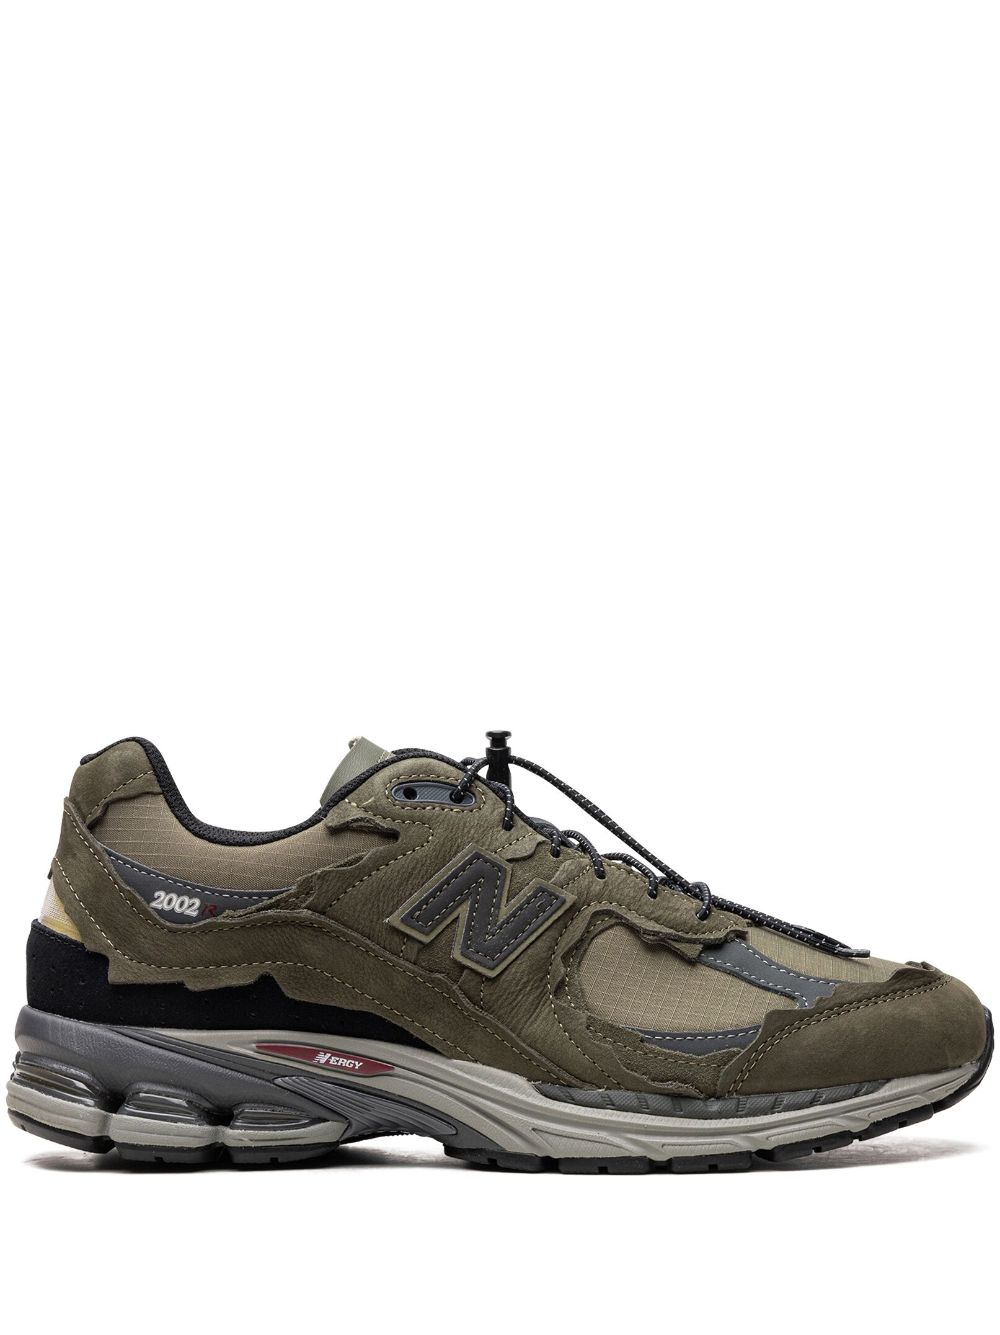 New Balance 2002R "Protection Pack Dark Moss" sneakers Green